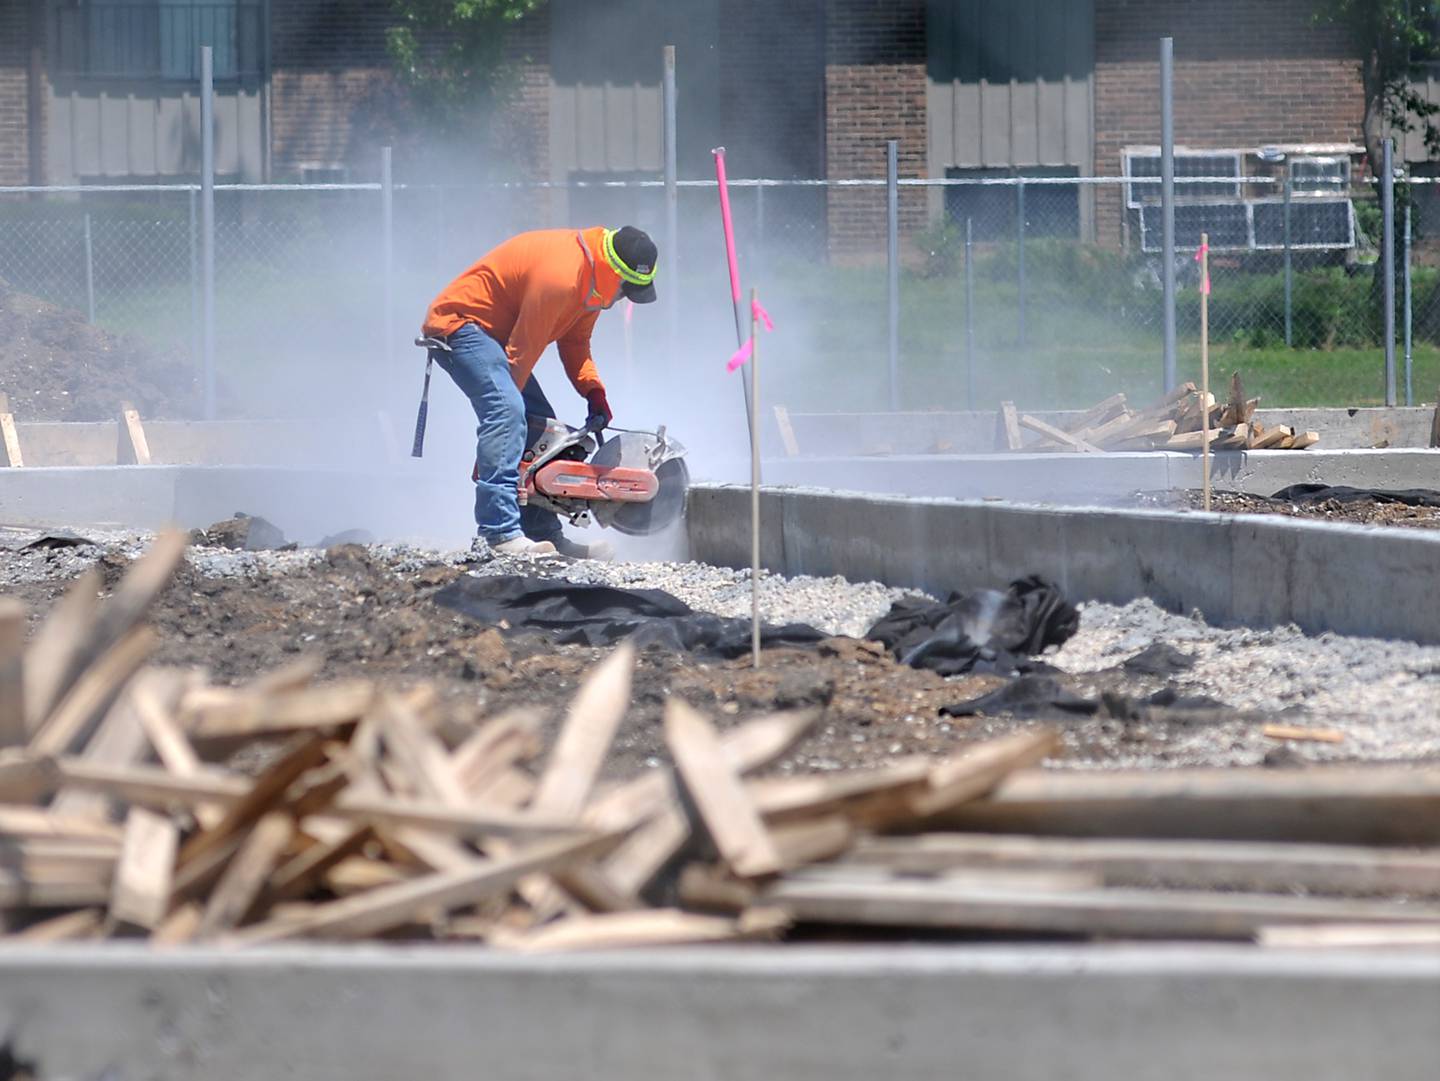 A worker from Herrera Construction works on cutting concrete Tuesday, June 14, 2022, while working on upgrading McCracken Athletic Field in McHenry.